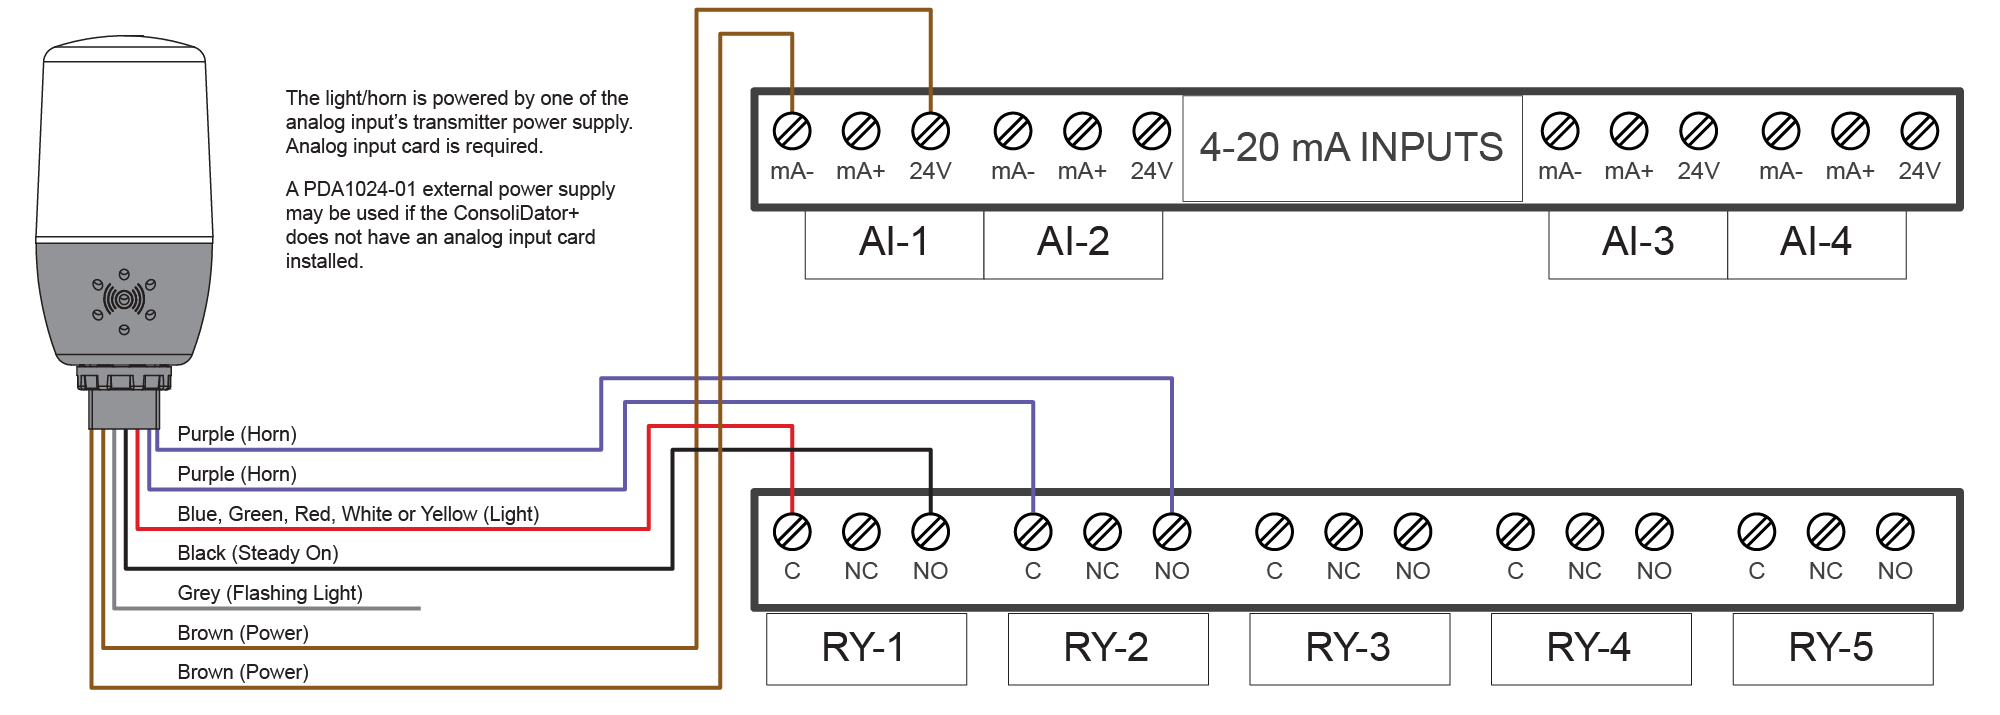 Wiring Connections for PDA-LH Models Using ConsoliDator+ Controller Internal Power Supply